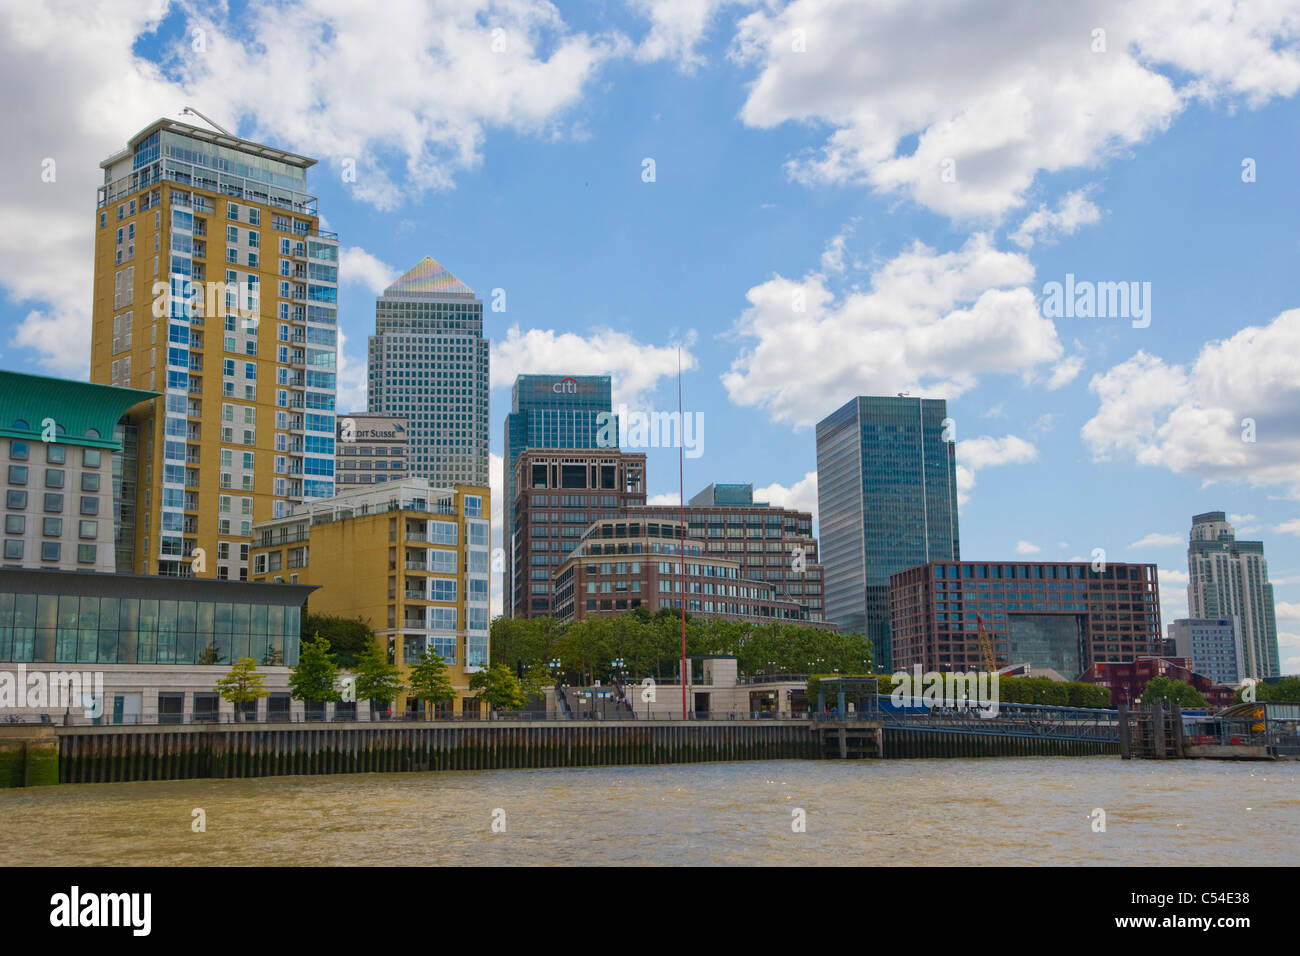 Canary Wharf, View from river Thames, Tower Hamlets, Docklands, London, England, UK Stock Photo